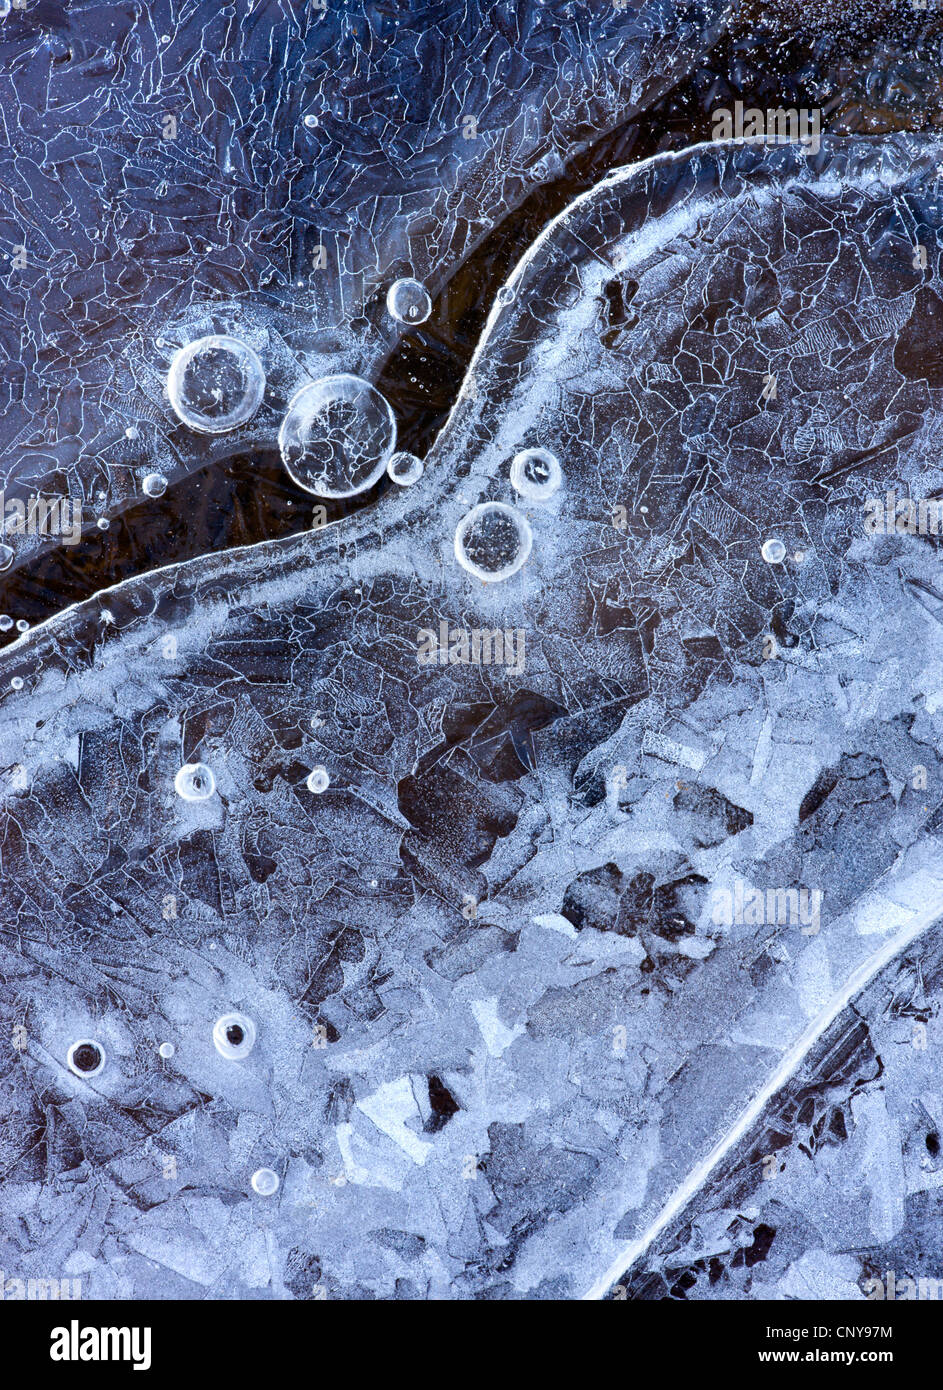 Ice patterns in a frozen puddle, Morchard Bishop, Devon, England. March 2009 Stock Photo